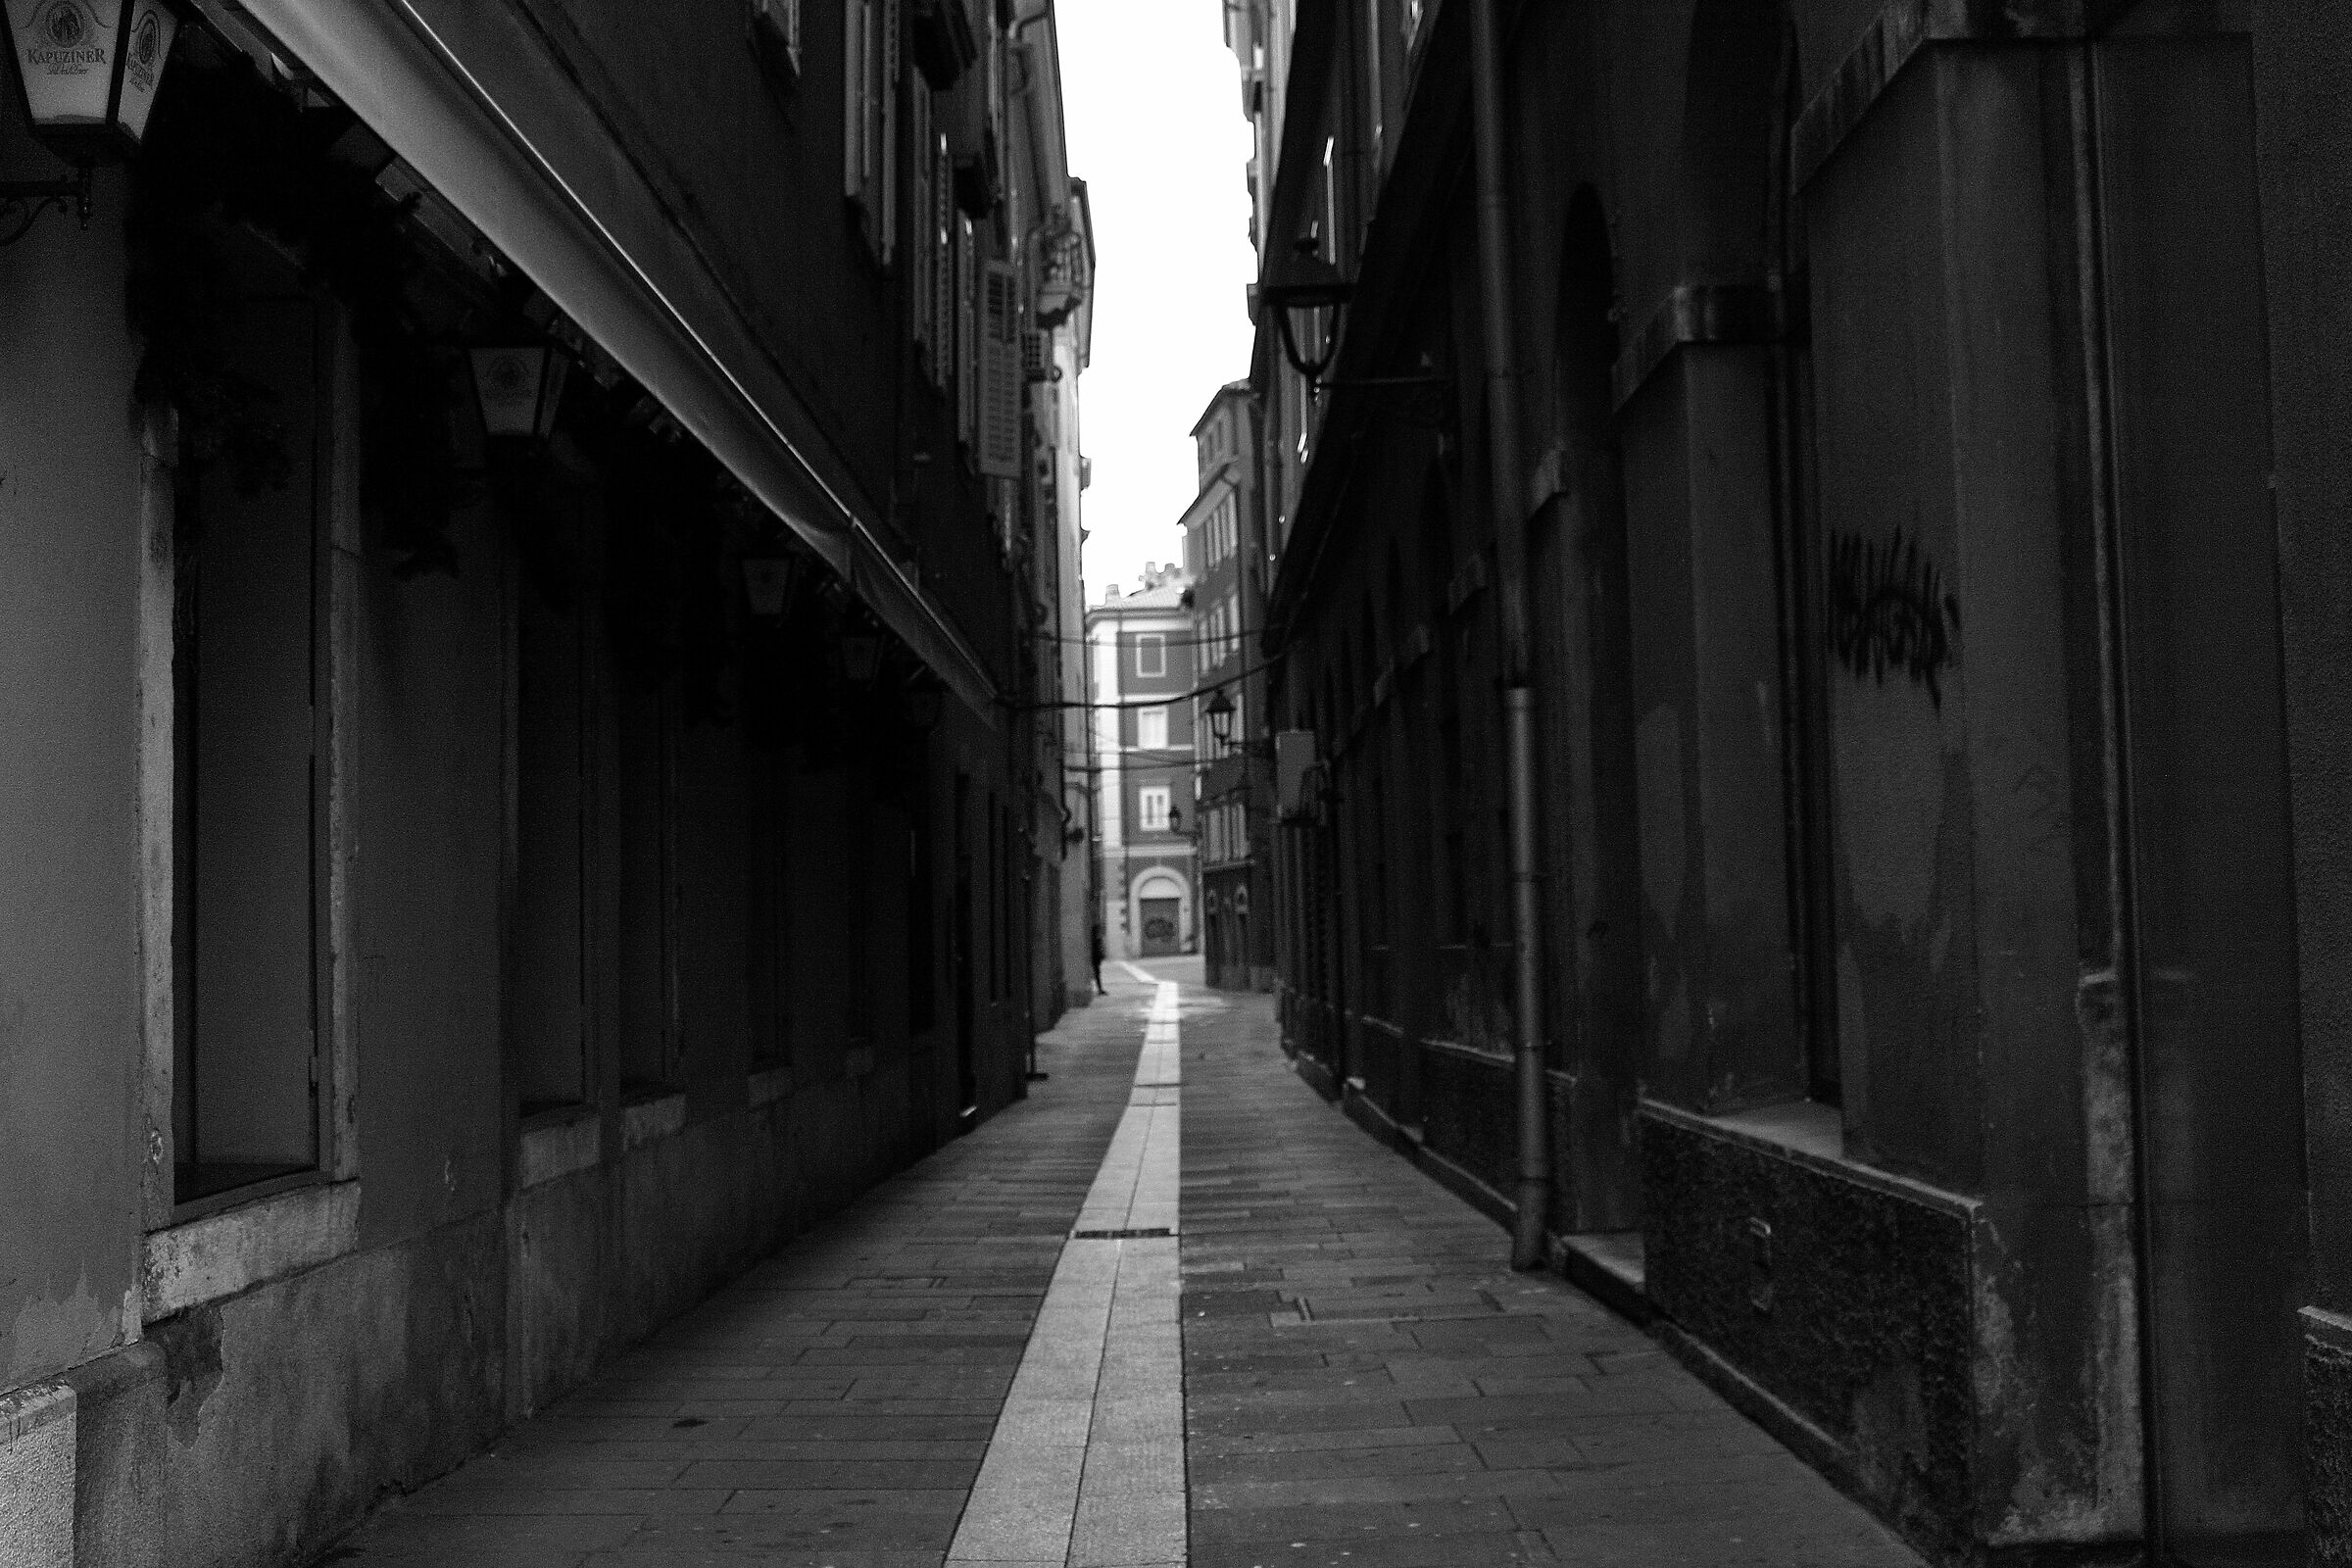 Alone in the alley...